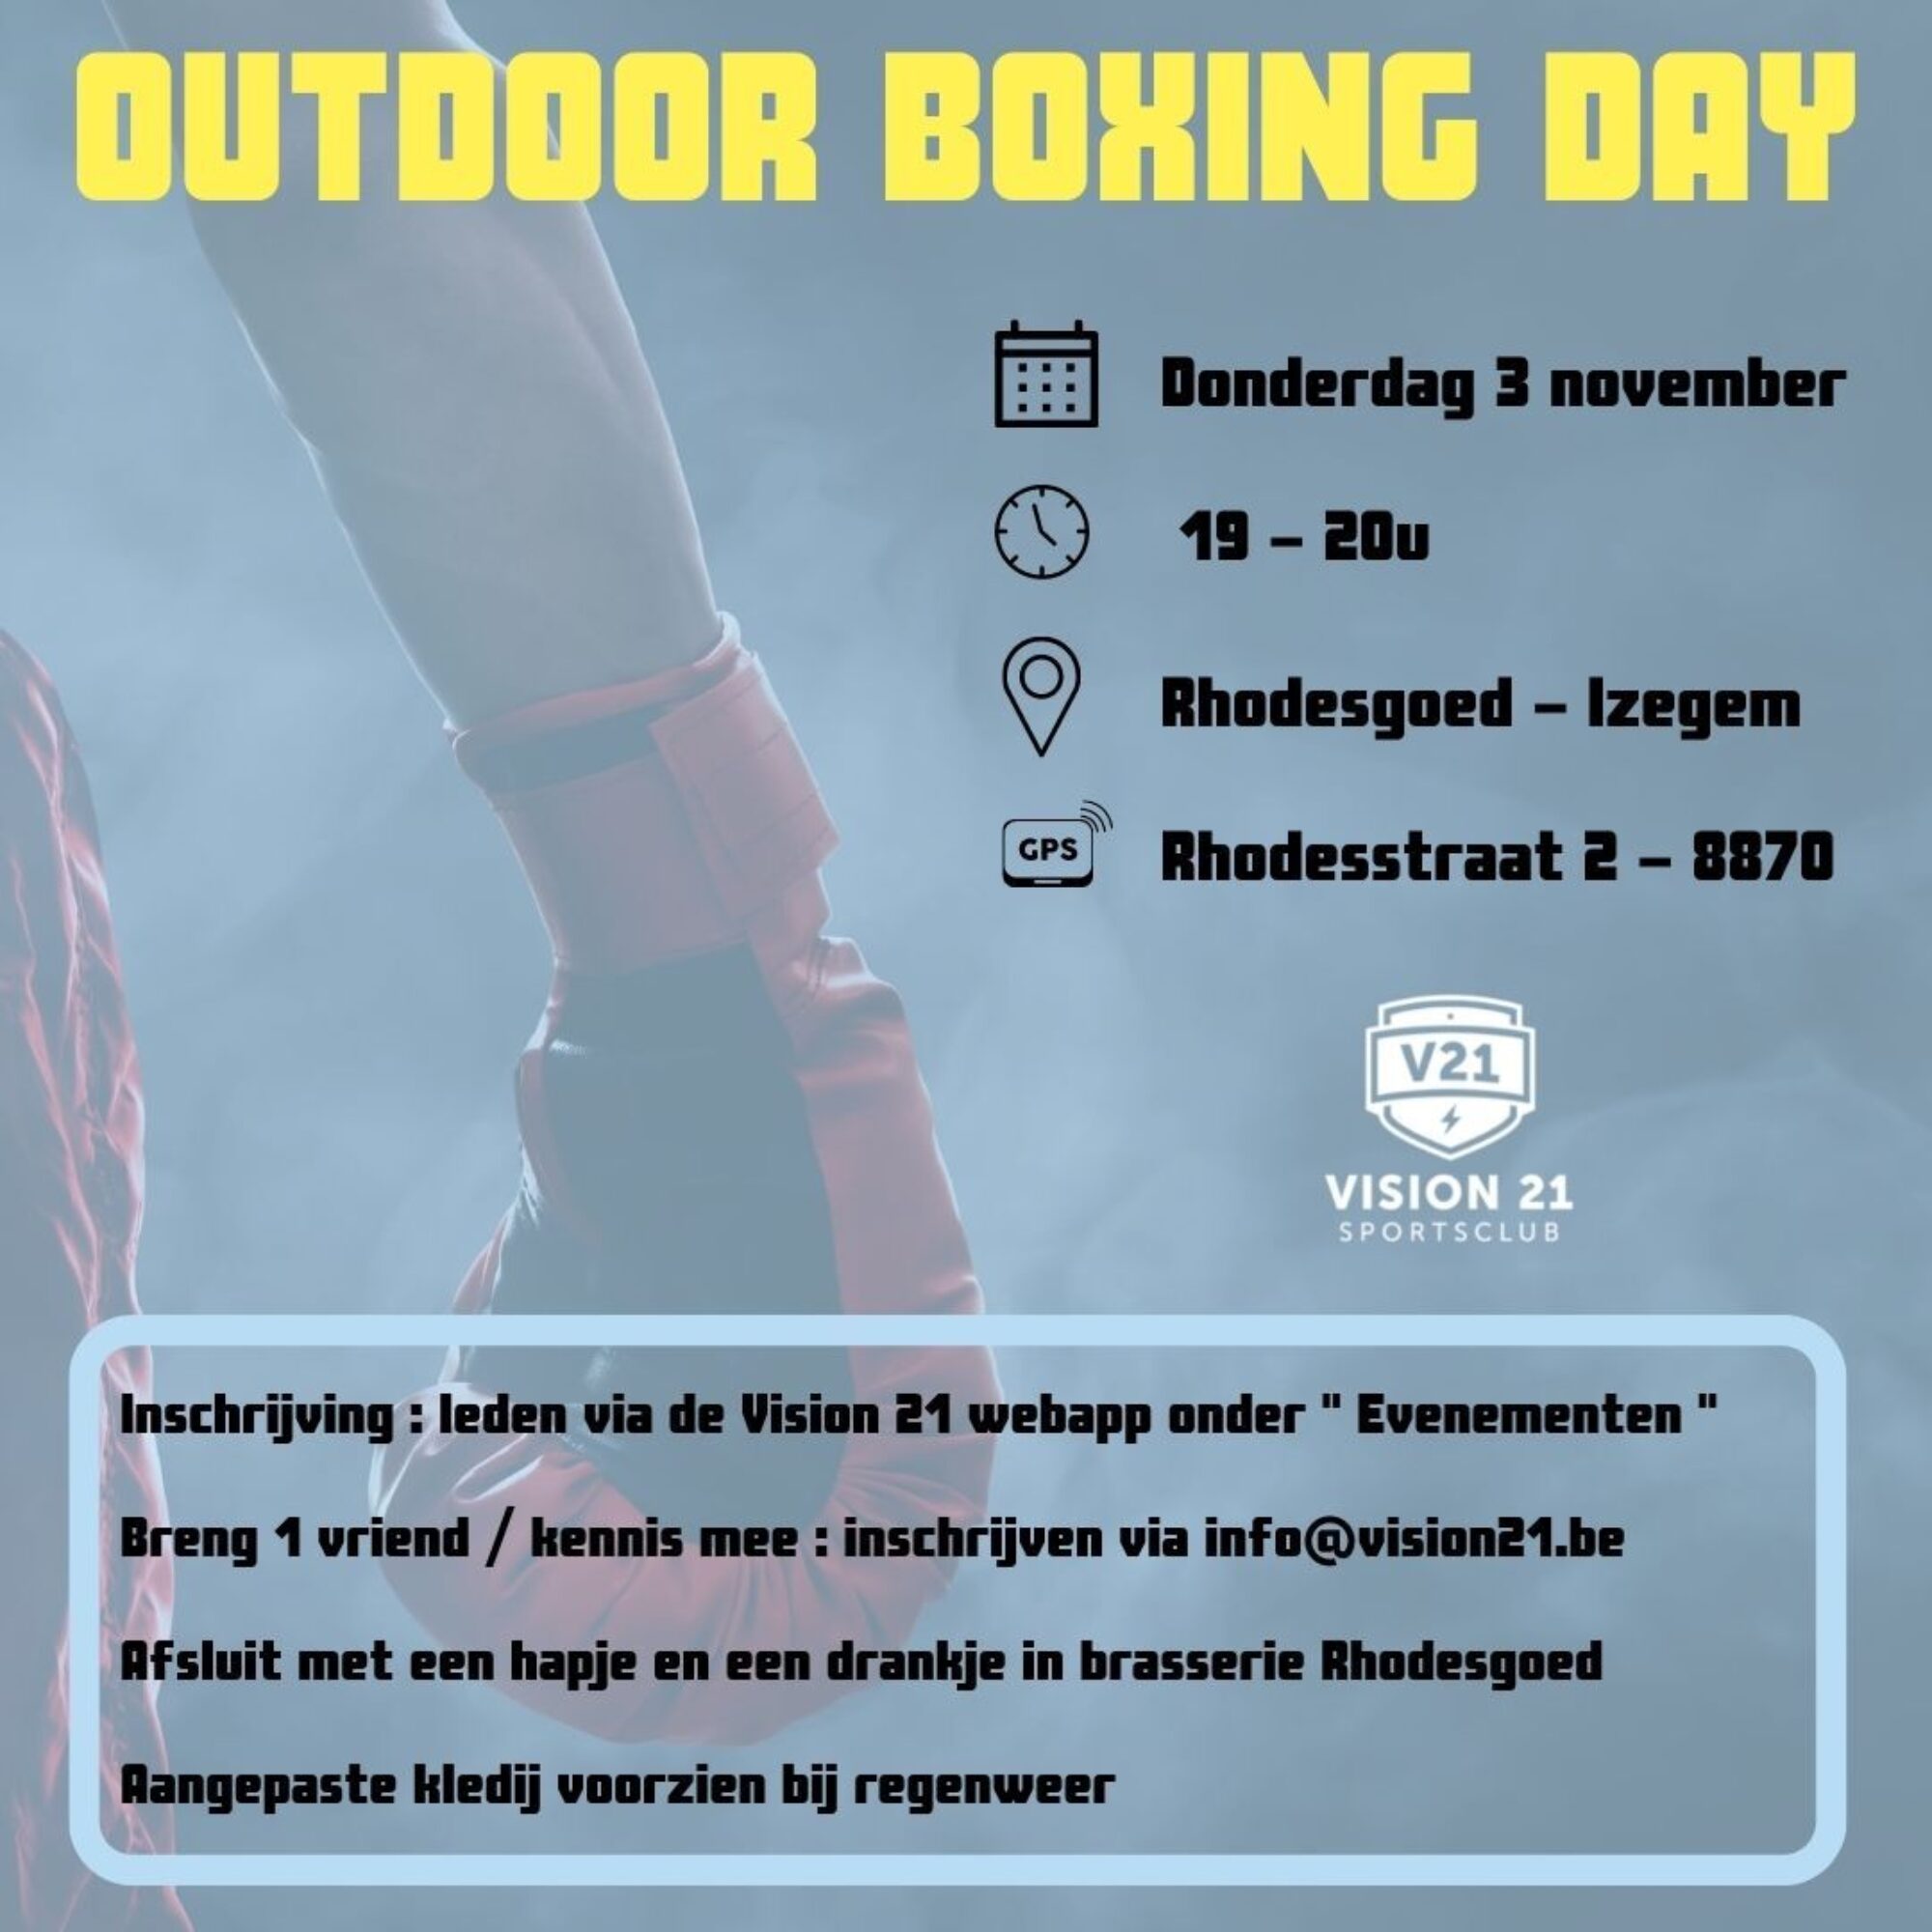 Outdoor Boxing